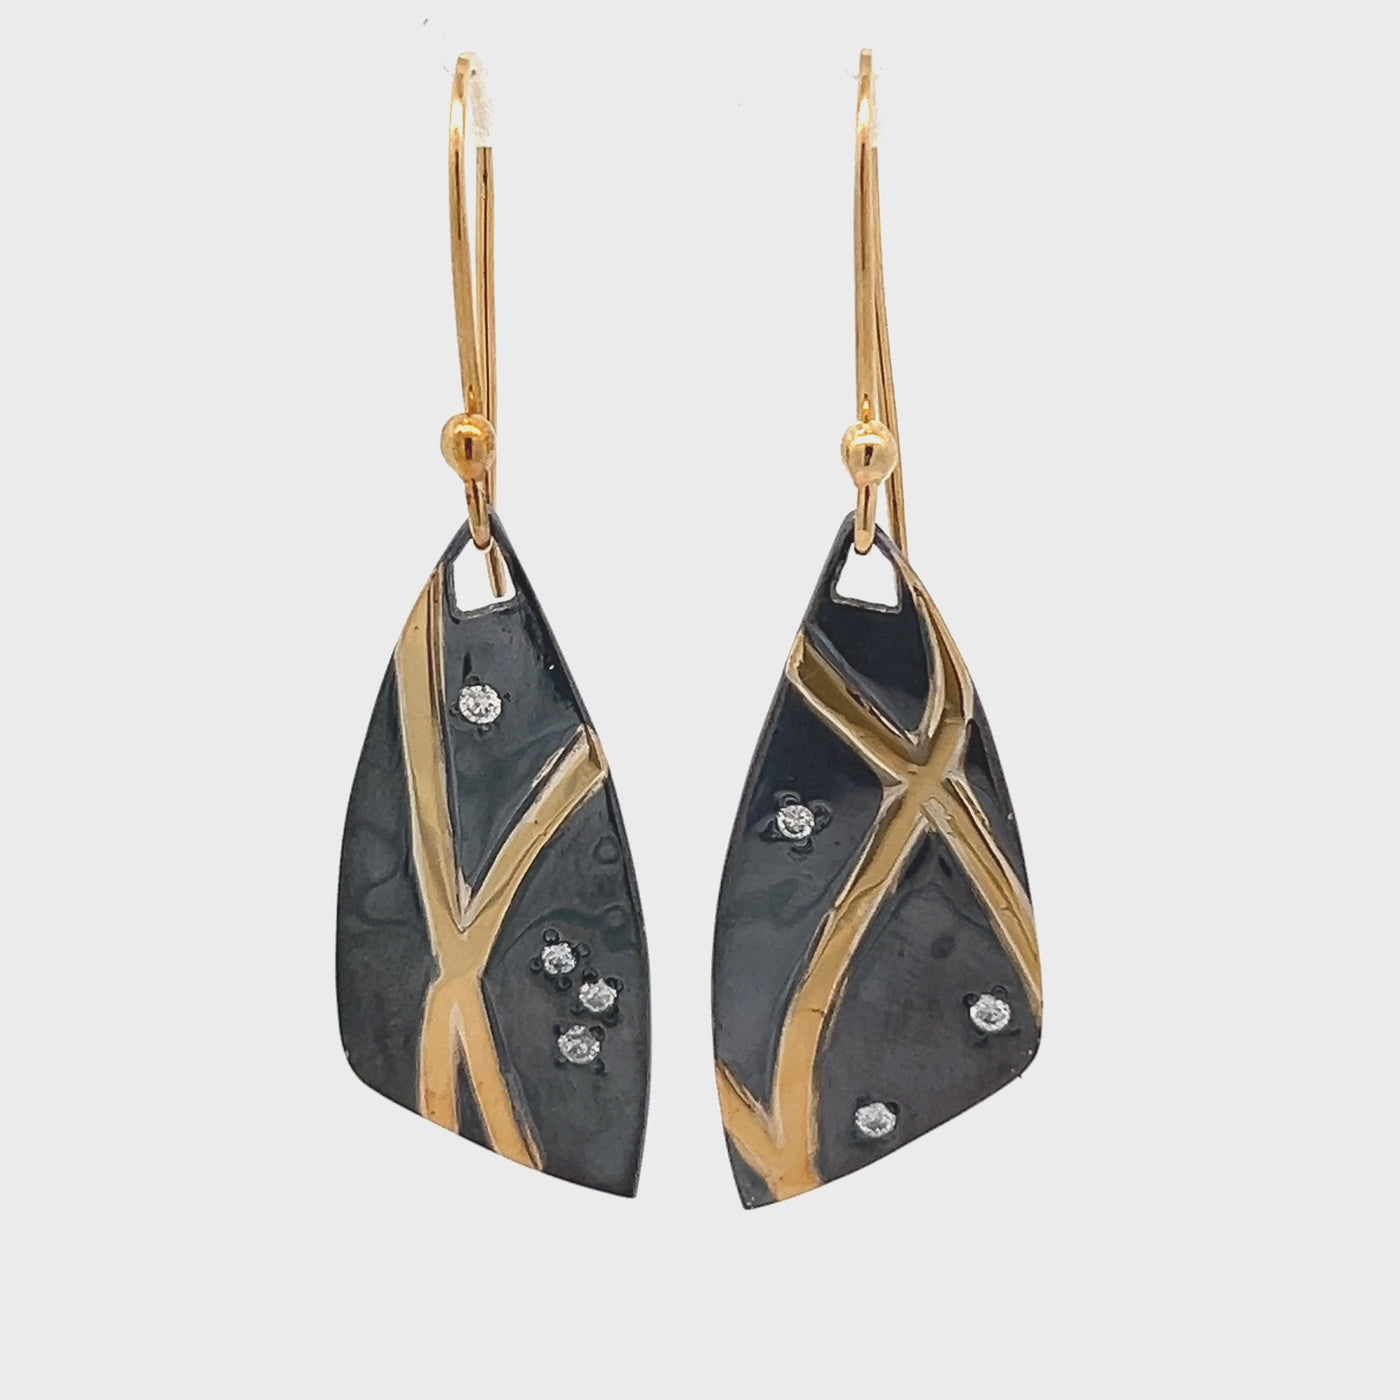 Oxidized Sterling Silver and 18k Yellow Gold Diamond Pathways Earrings by Paul Richter (0.09ctw.)